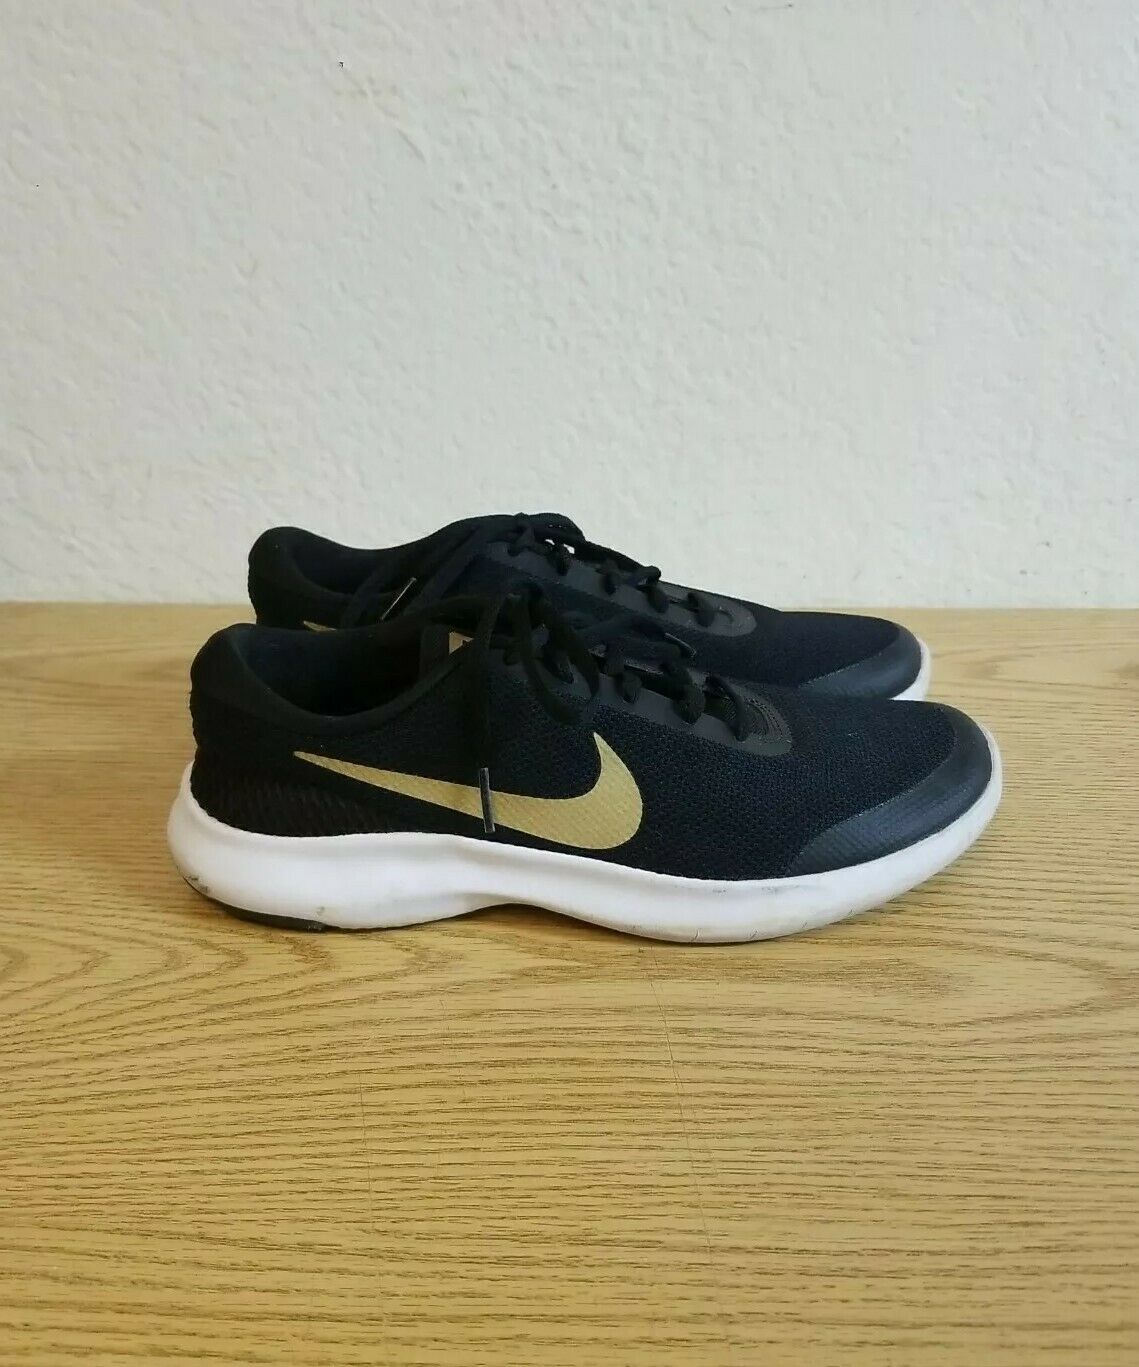 Nike Womens Flex Experience RN7 Running Walking Excercise Shoes Black Gold Sz 10